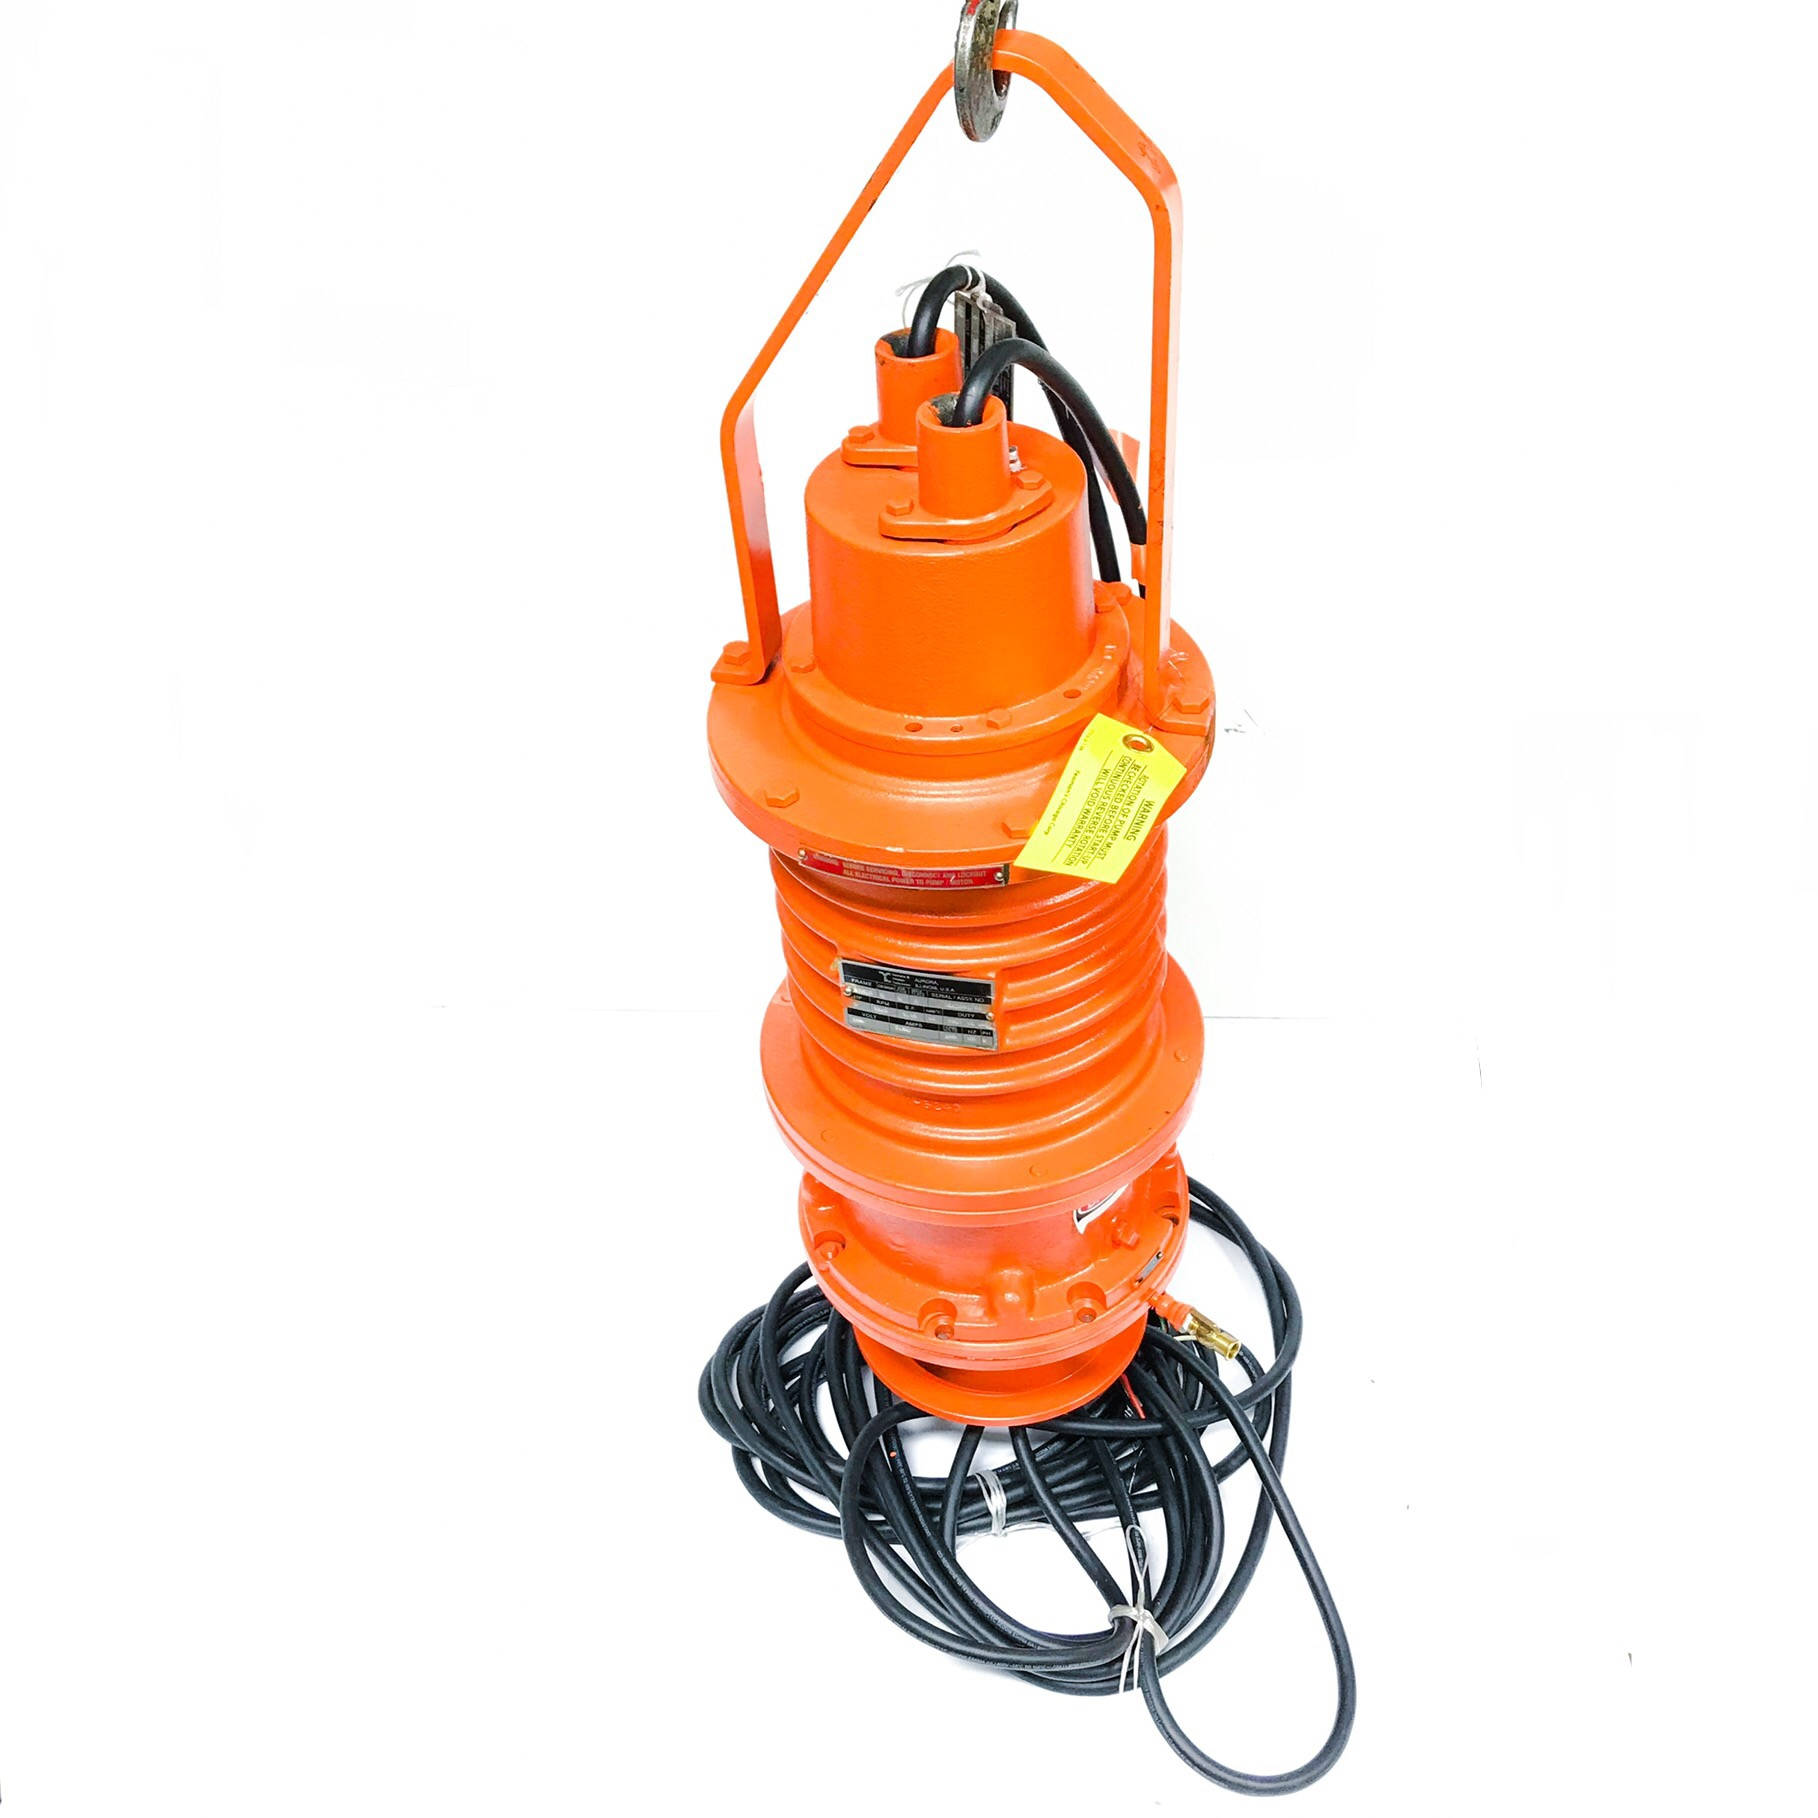 CP4103 Yeomans Chicago Submersible Pump 1